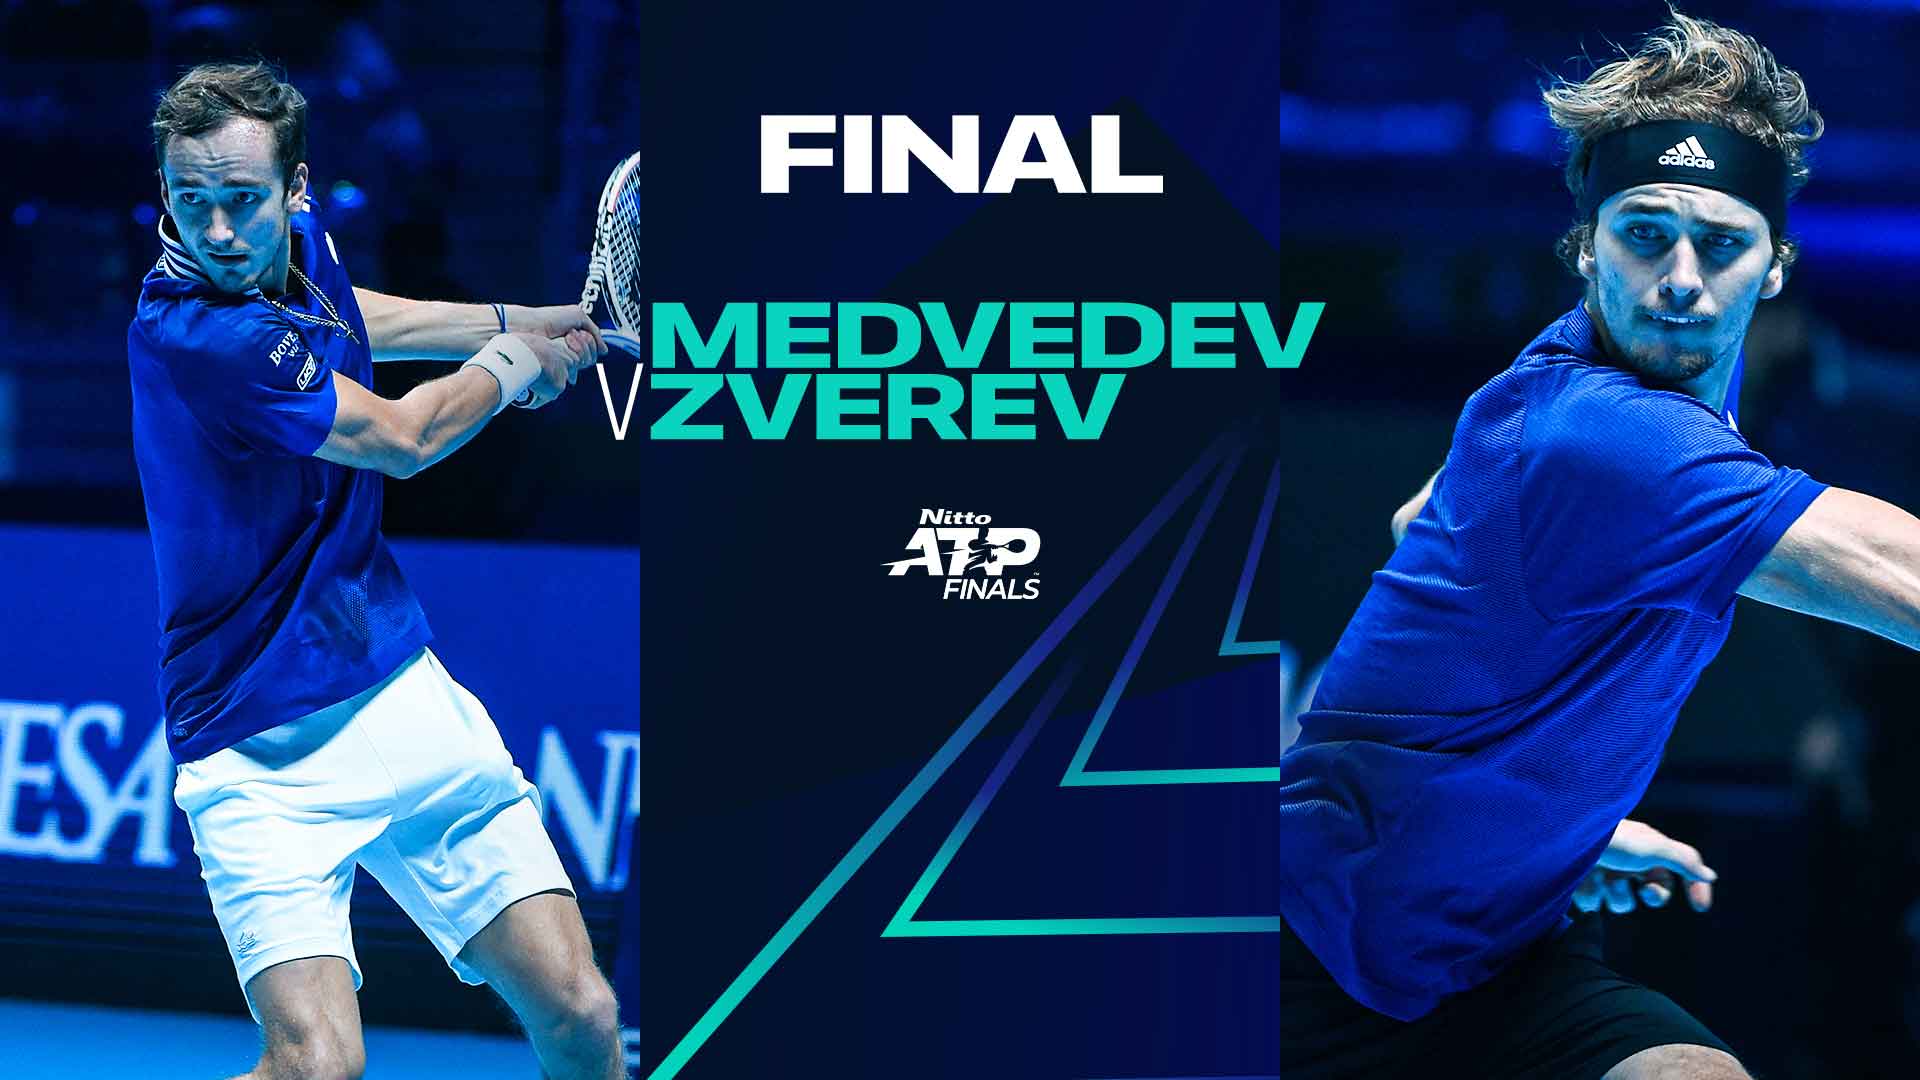 v Zverev: An Epic Final In Prospect - Nitto ATP Finals Preview | ATP Tour | Tennis